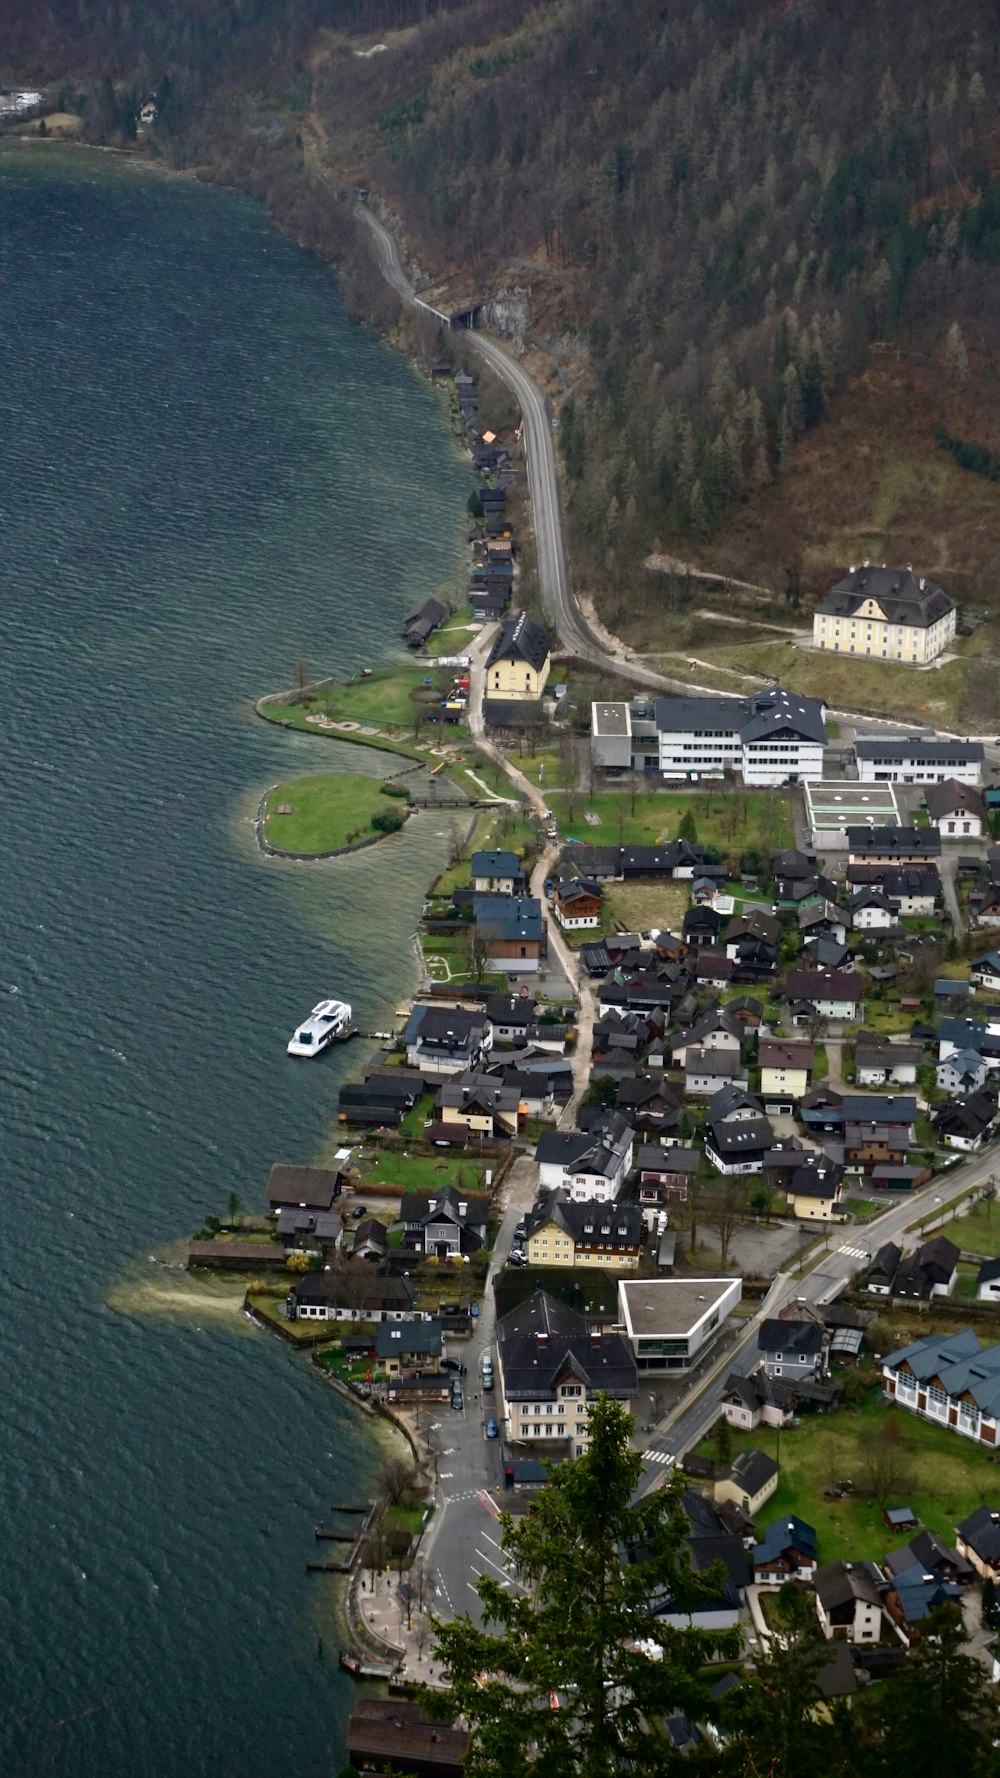 an aerial view of a town by the water